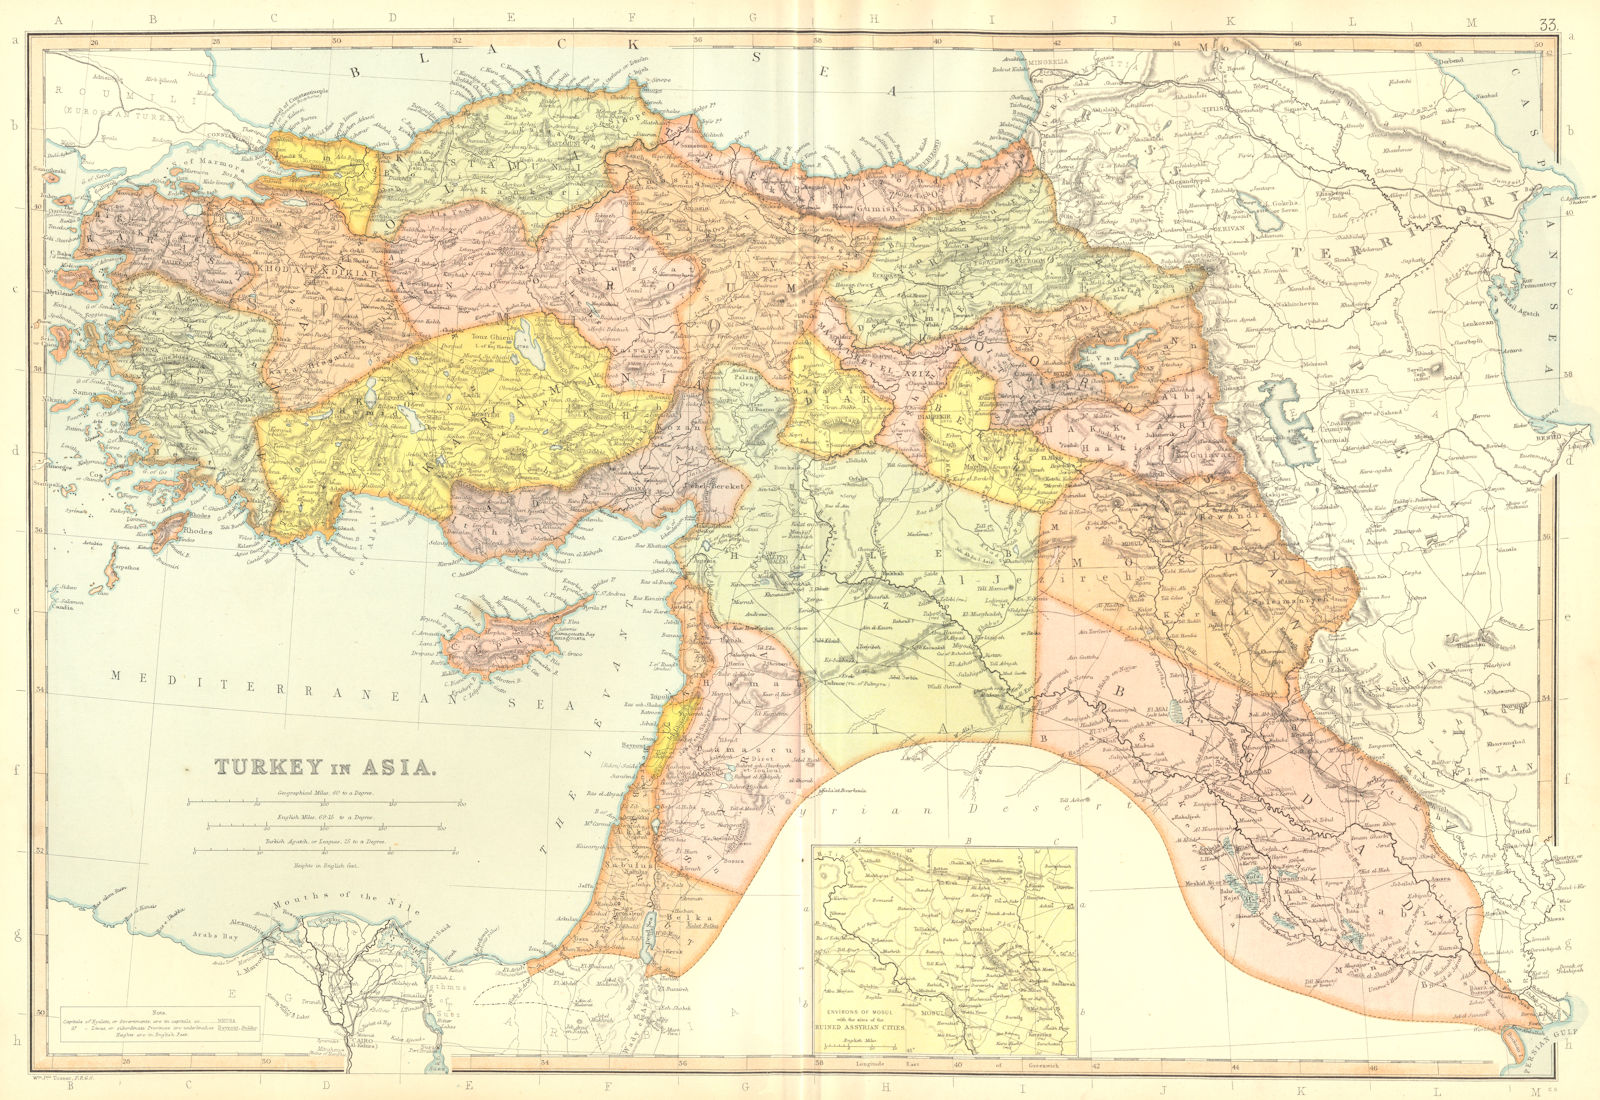 TURKEY IN ASIA. Iraq Syria Palestine.Inset Mosul & Assyrian cities 1893 map